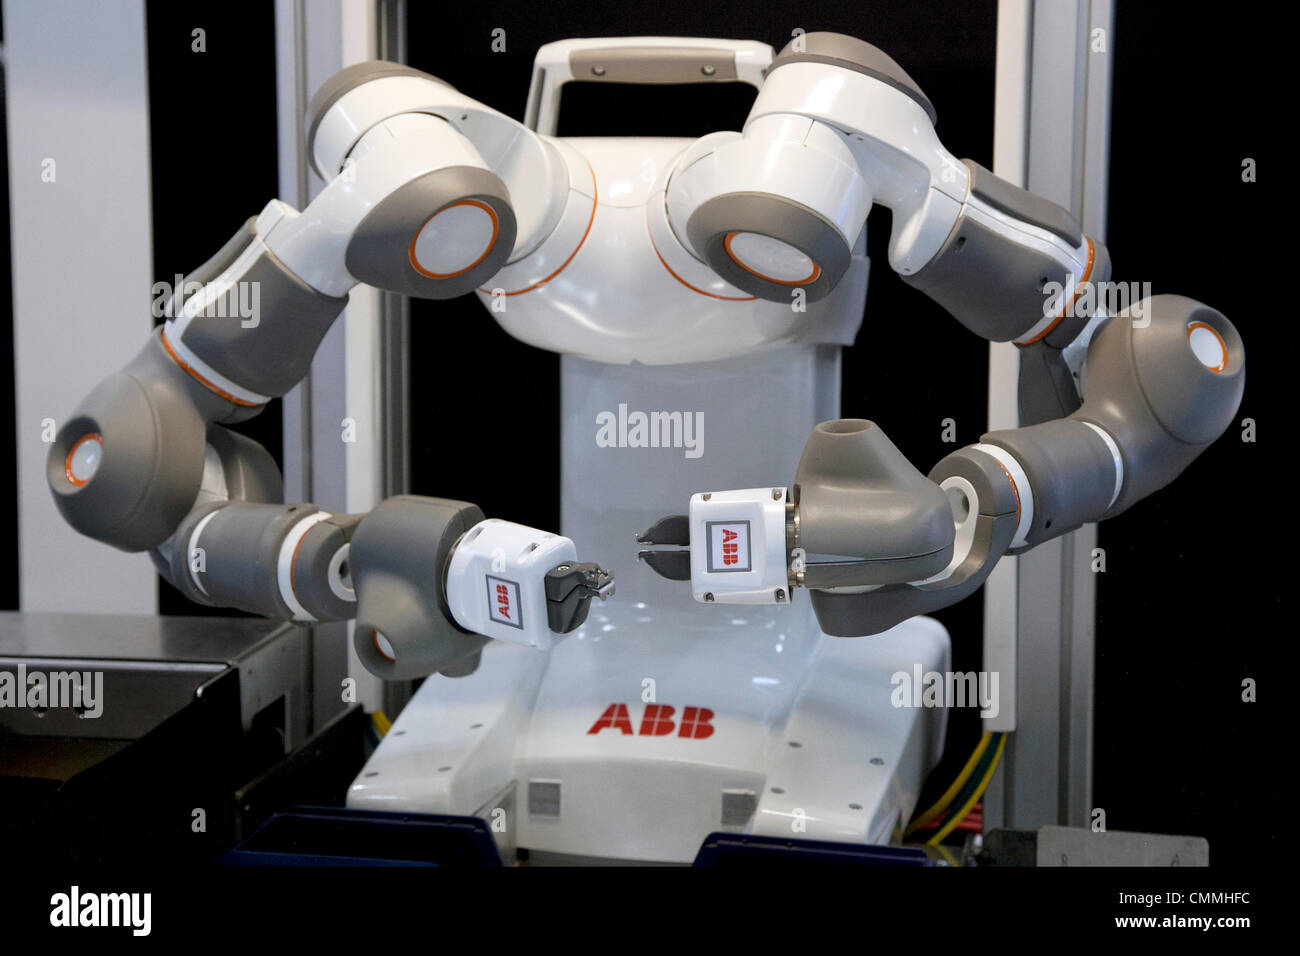 Tokyo, Japan. 6th Nov, 2013. The robot of ABB "Dual-arm concept robot"  performs at the International Robot Exhibition 2013 in Tokyo, Japan,  November 6, 2013. The IREX is the largest robot trade